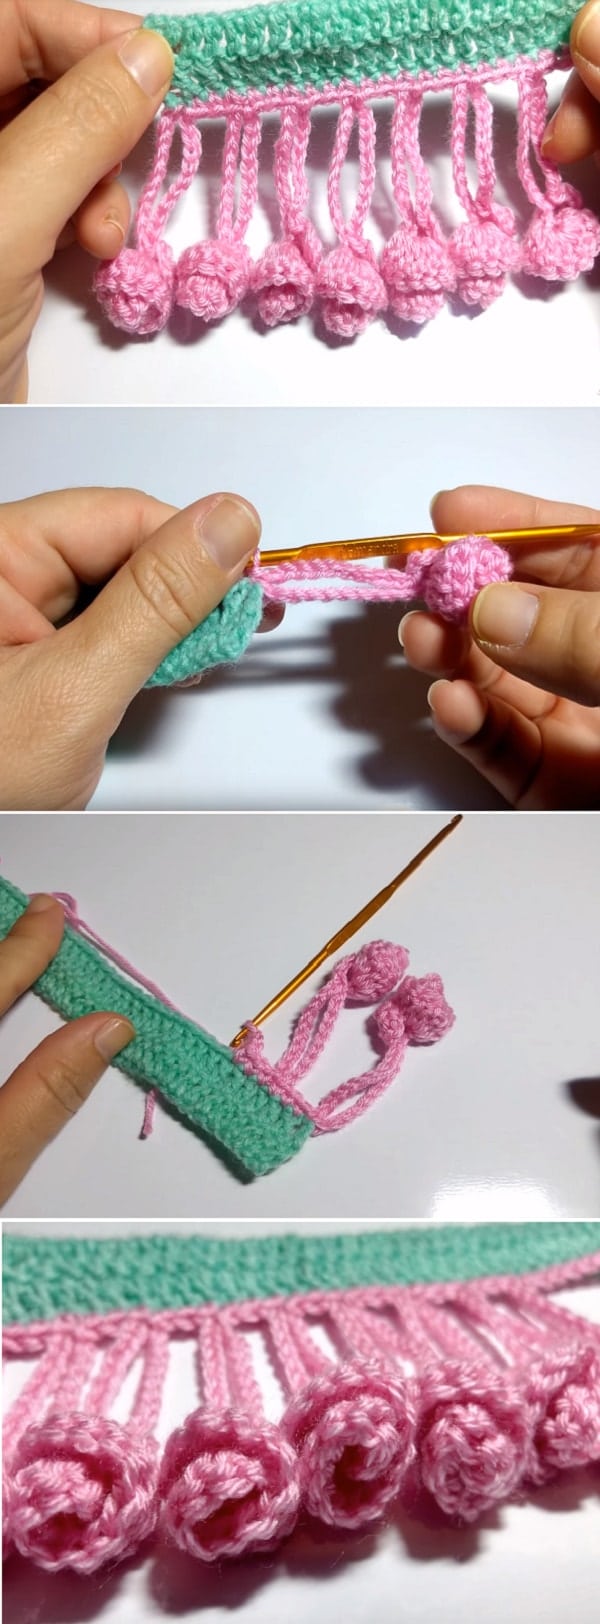 Today I will show you how to Crochet Rococo Flower edging. The edges of your crochet and knitting patterns are just an important for your project.